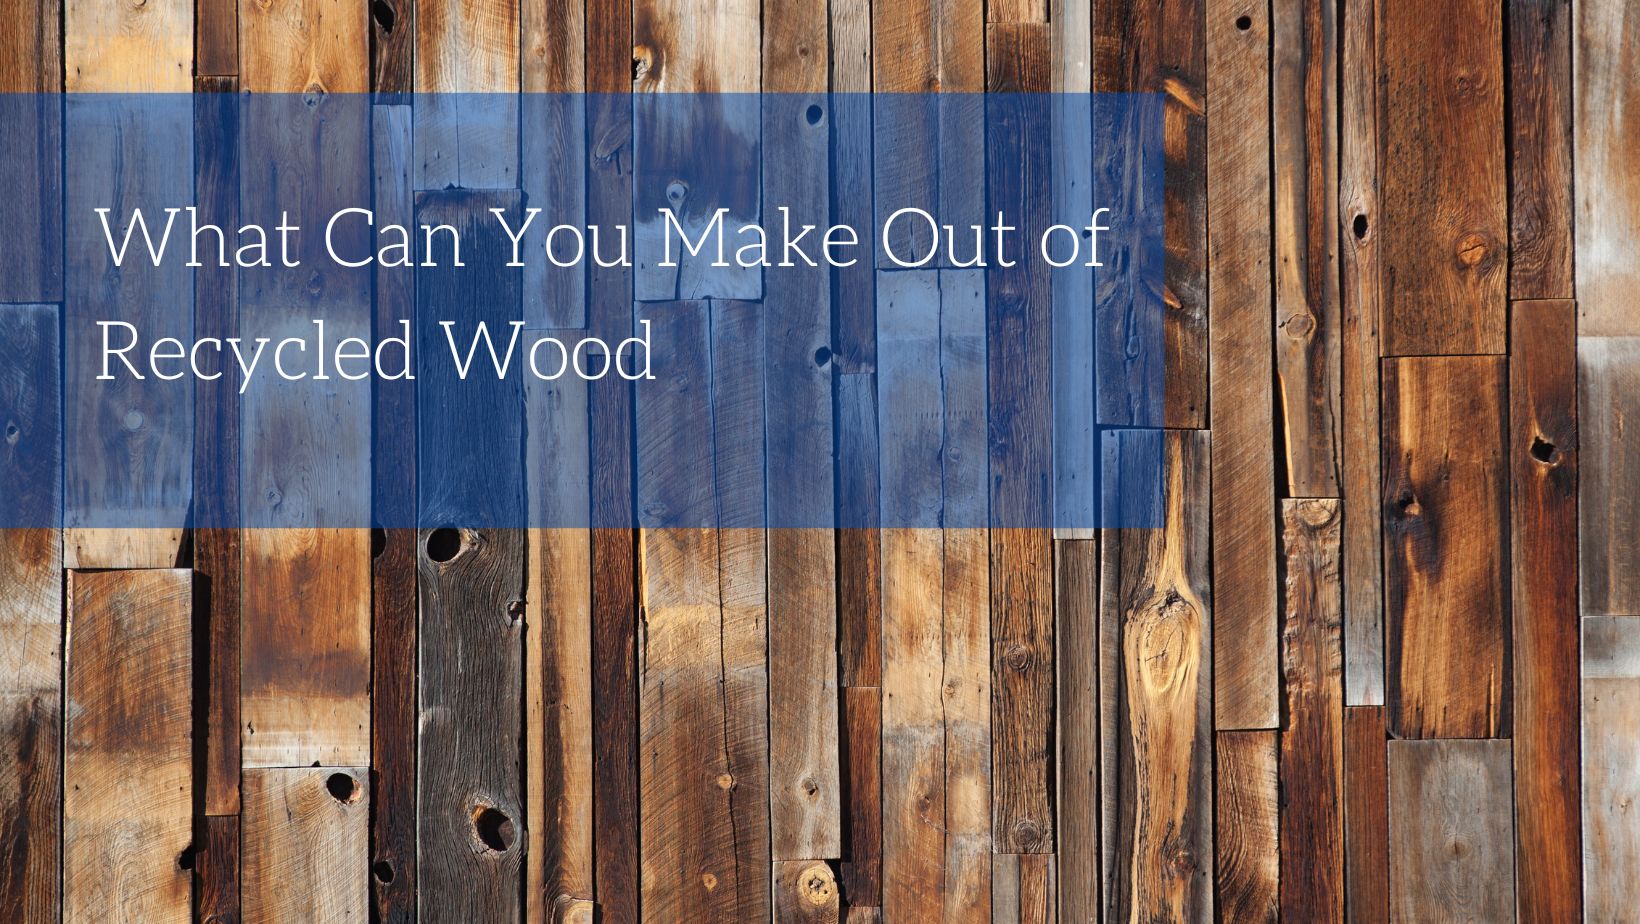 What Can You Make Out of Recycled Wood?